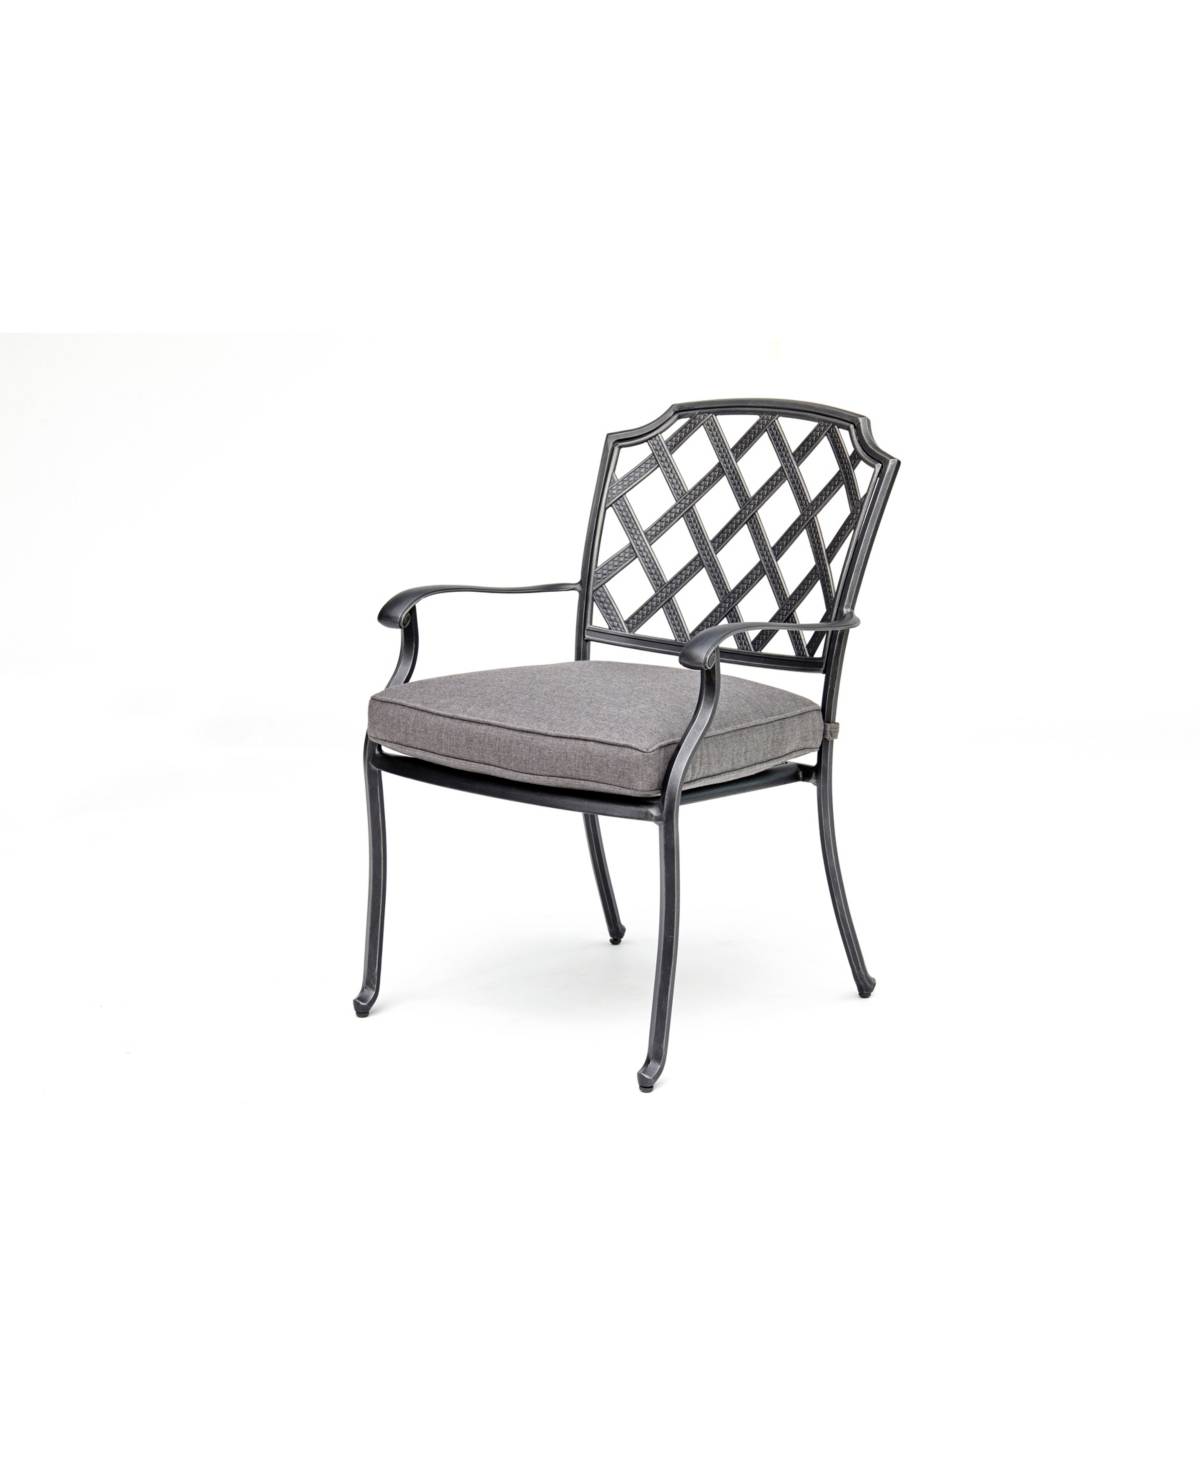 Vintage Ii Outdoor Dining Chair with Outdura Cushions, Created for Macys